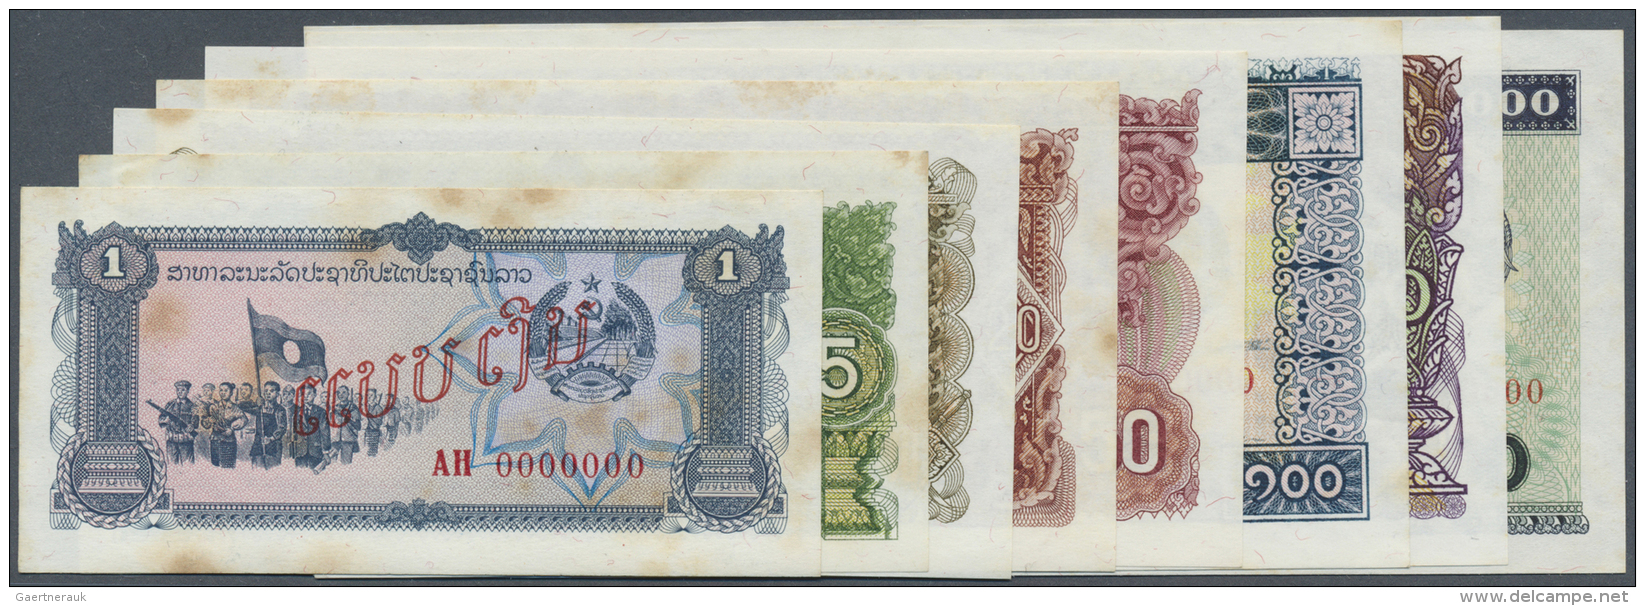 Laos: Set Of 8 Specimen Notes From 1 To 1000 Kip P. 25s-32s, All With Stains In Paper But Unfolded, Condition: XF+. (8 P - Laos